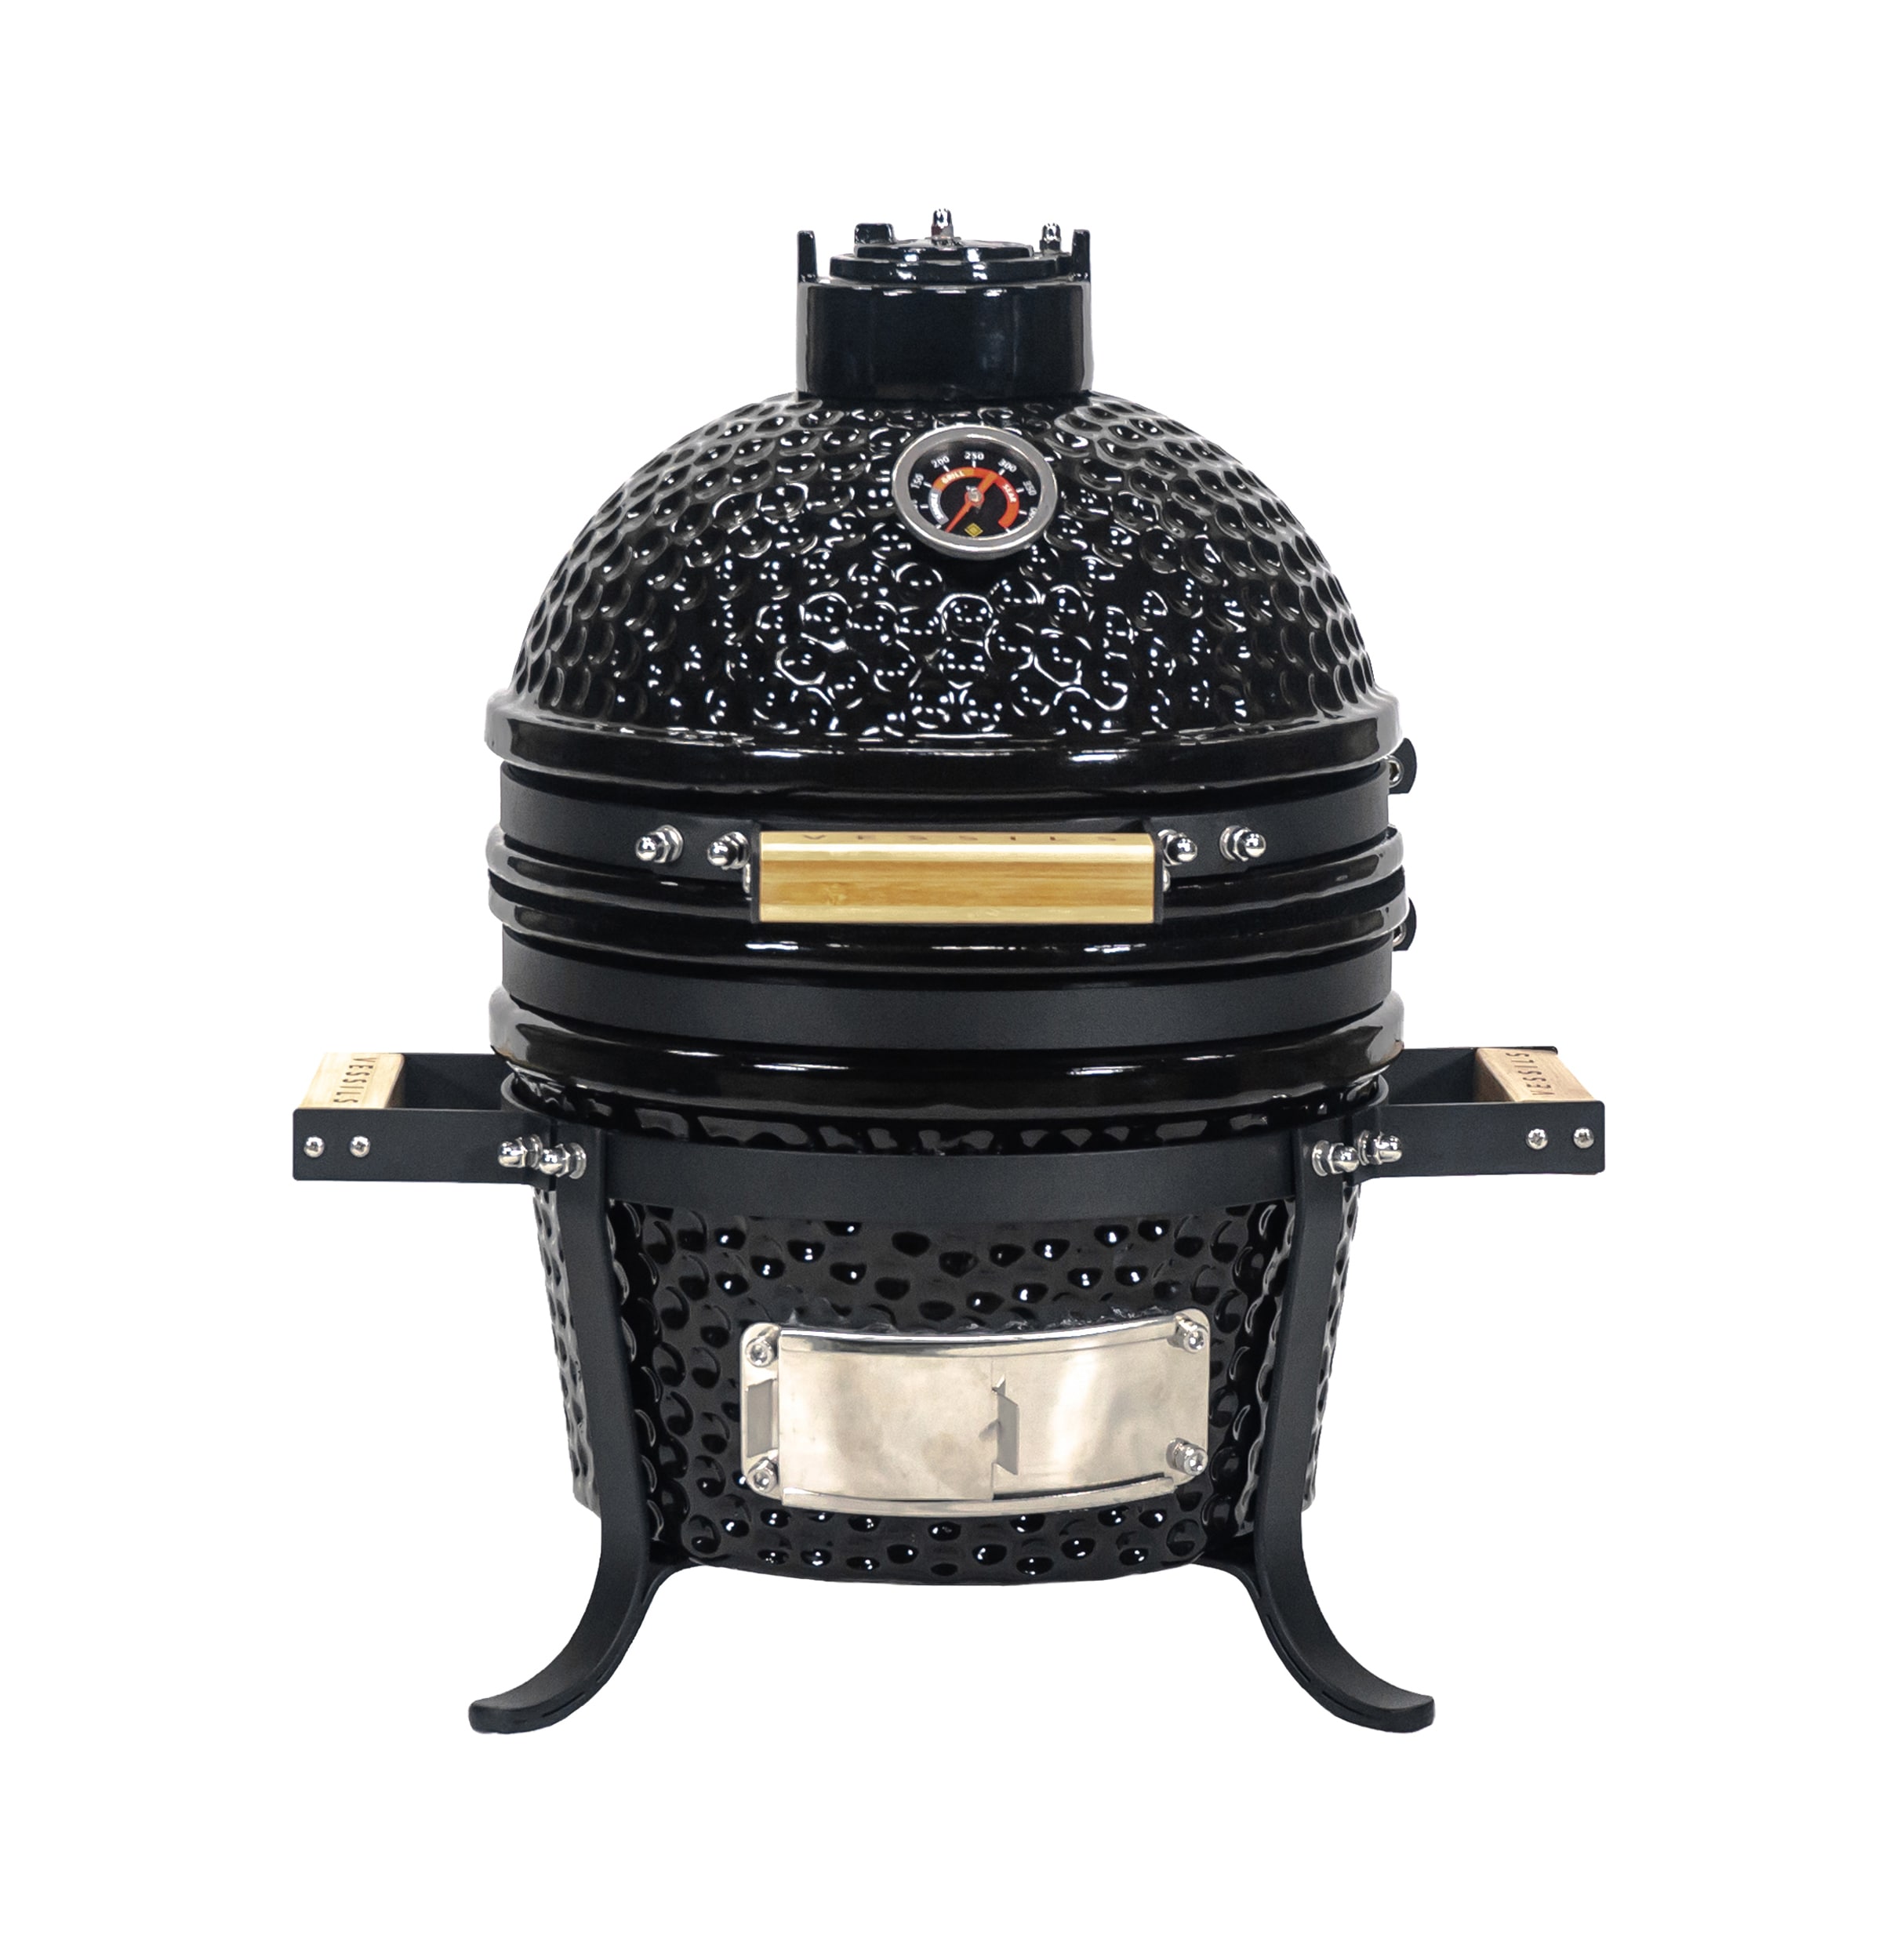 MY13TT004 9.8-in W Black Kamado Charcoal Grill in the Charcoal Grills department Lowes.com